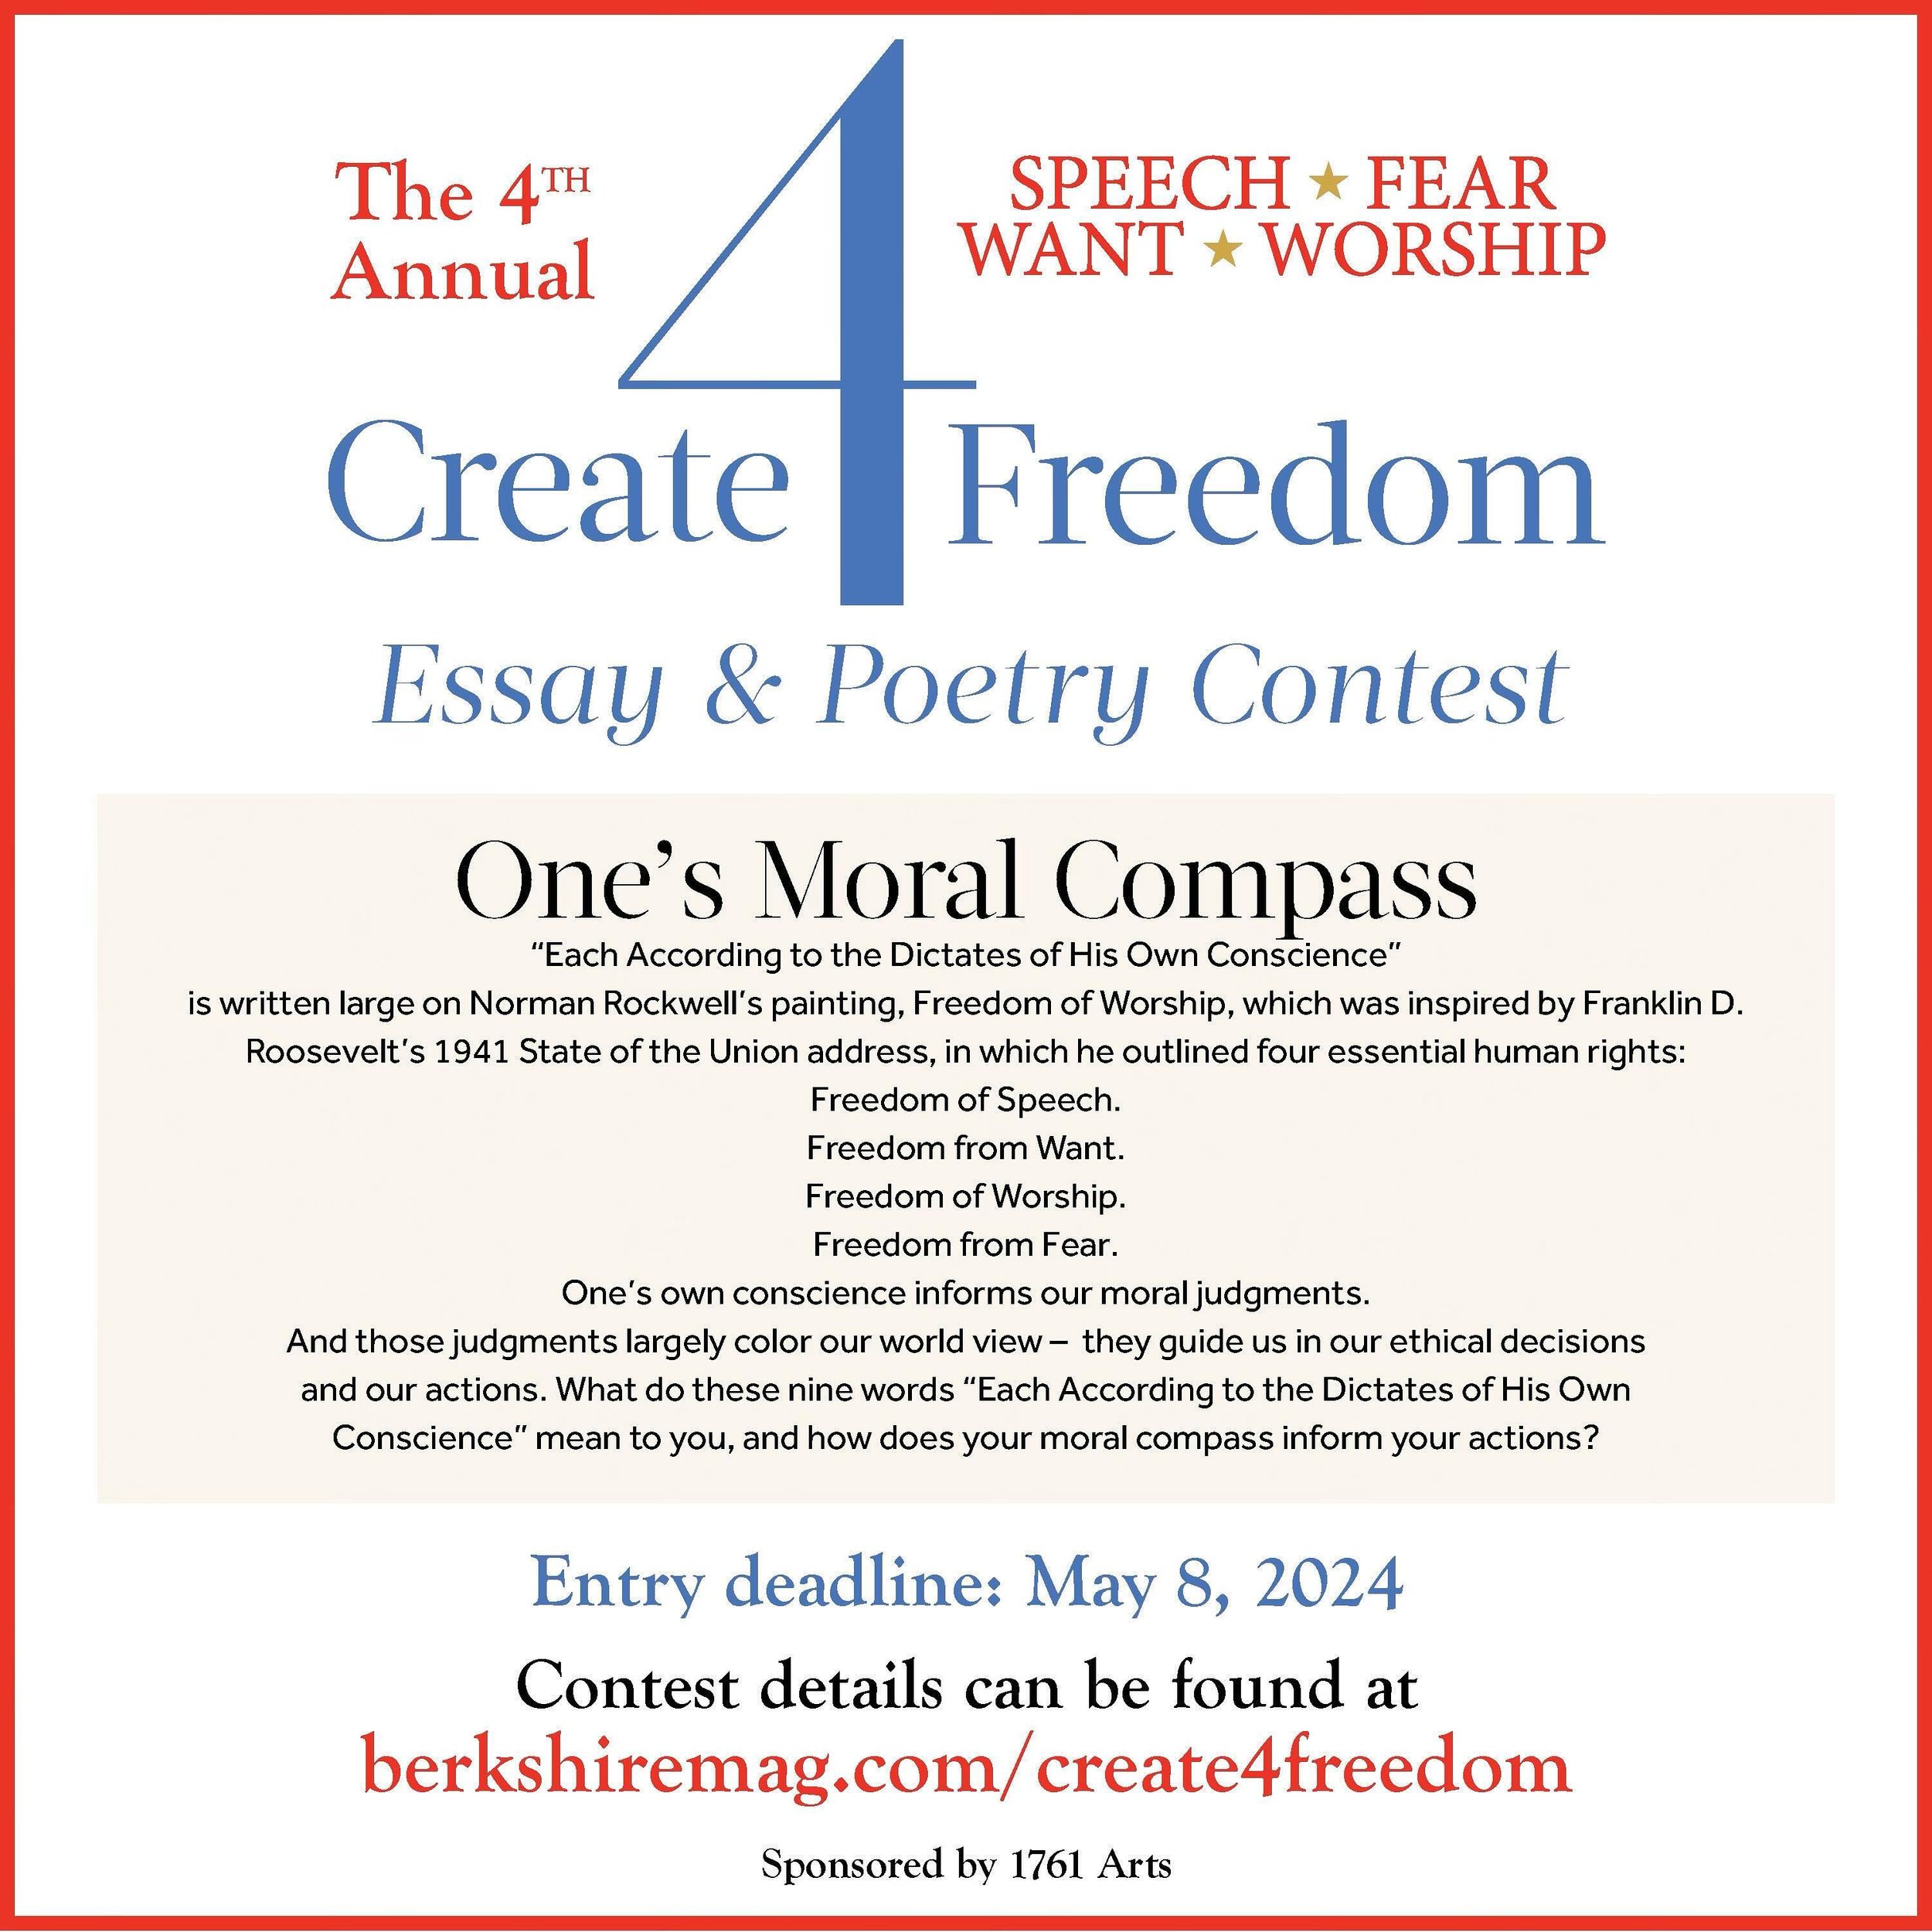 The deadline is coming up for our annual essay and poetry contest&mdash;please submit your entries by Monday. There is a cash prize as well as being published in the July issue of Berkshire Magazine! Details can be found in the link in our profile. #